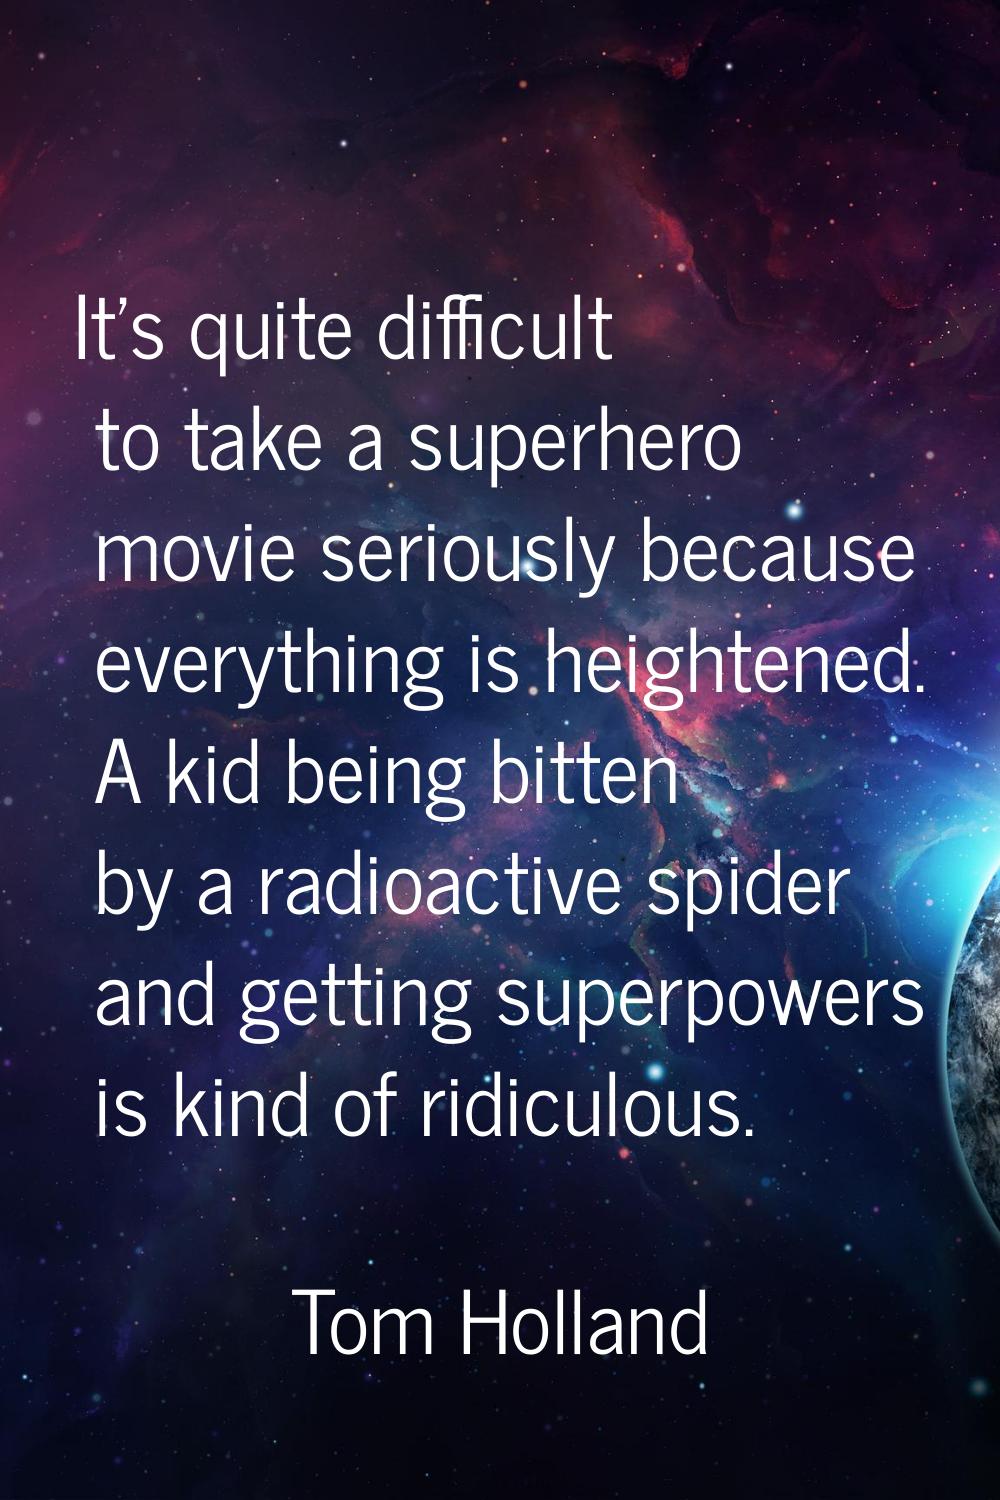 It's quite difficult to take a superhero movie seriously because everything is heightened. A kid be